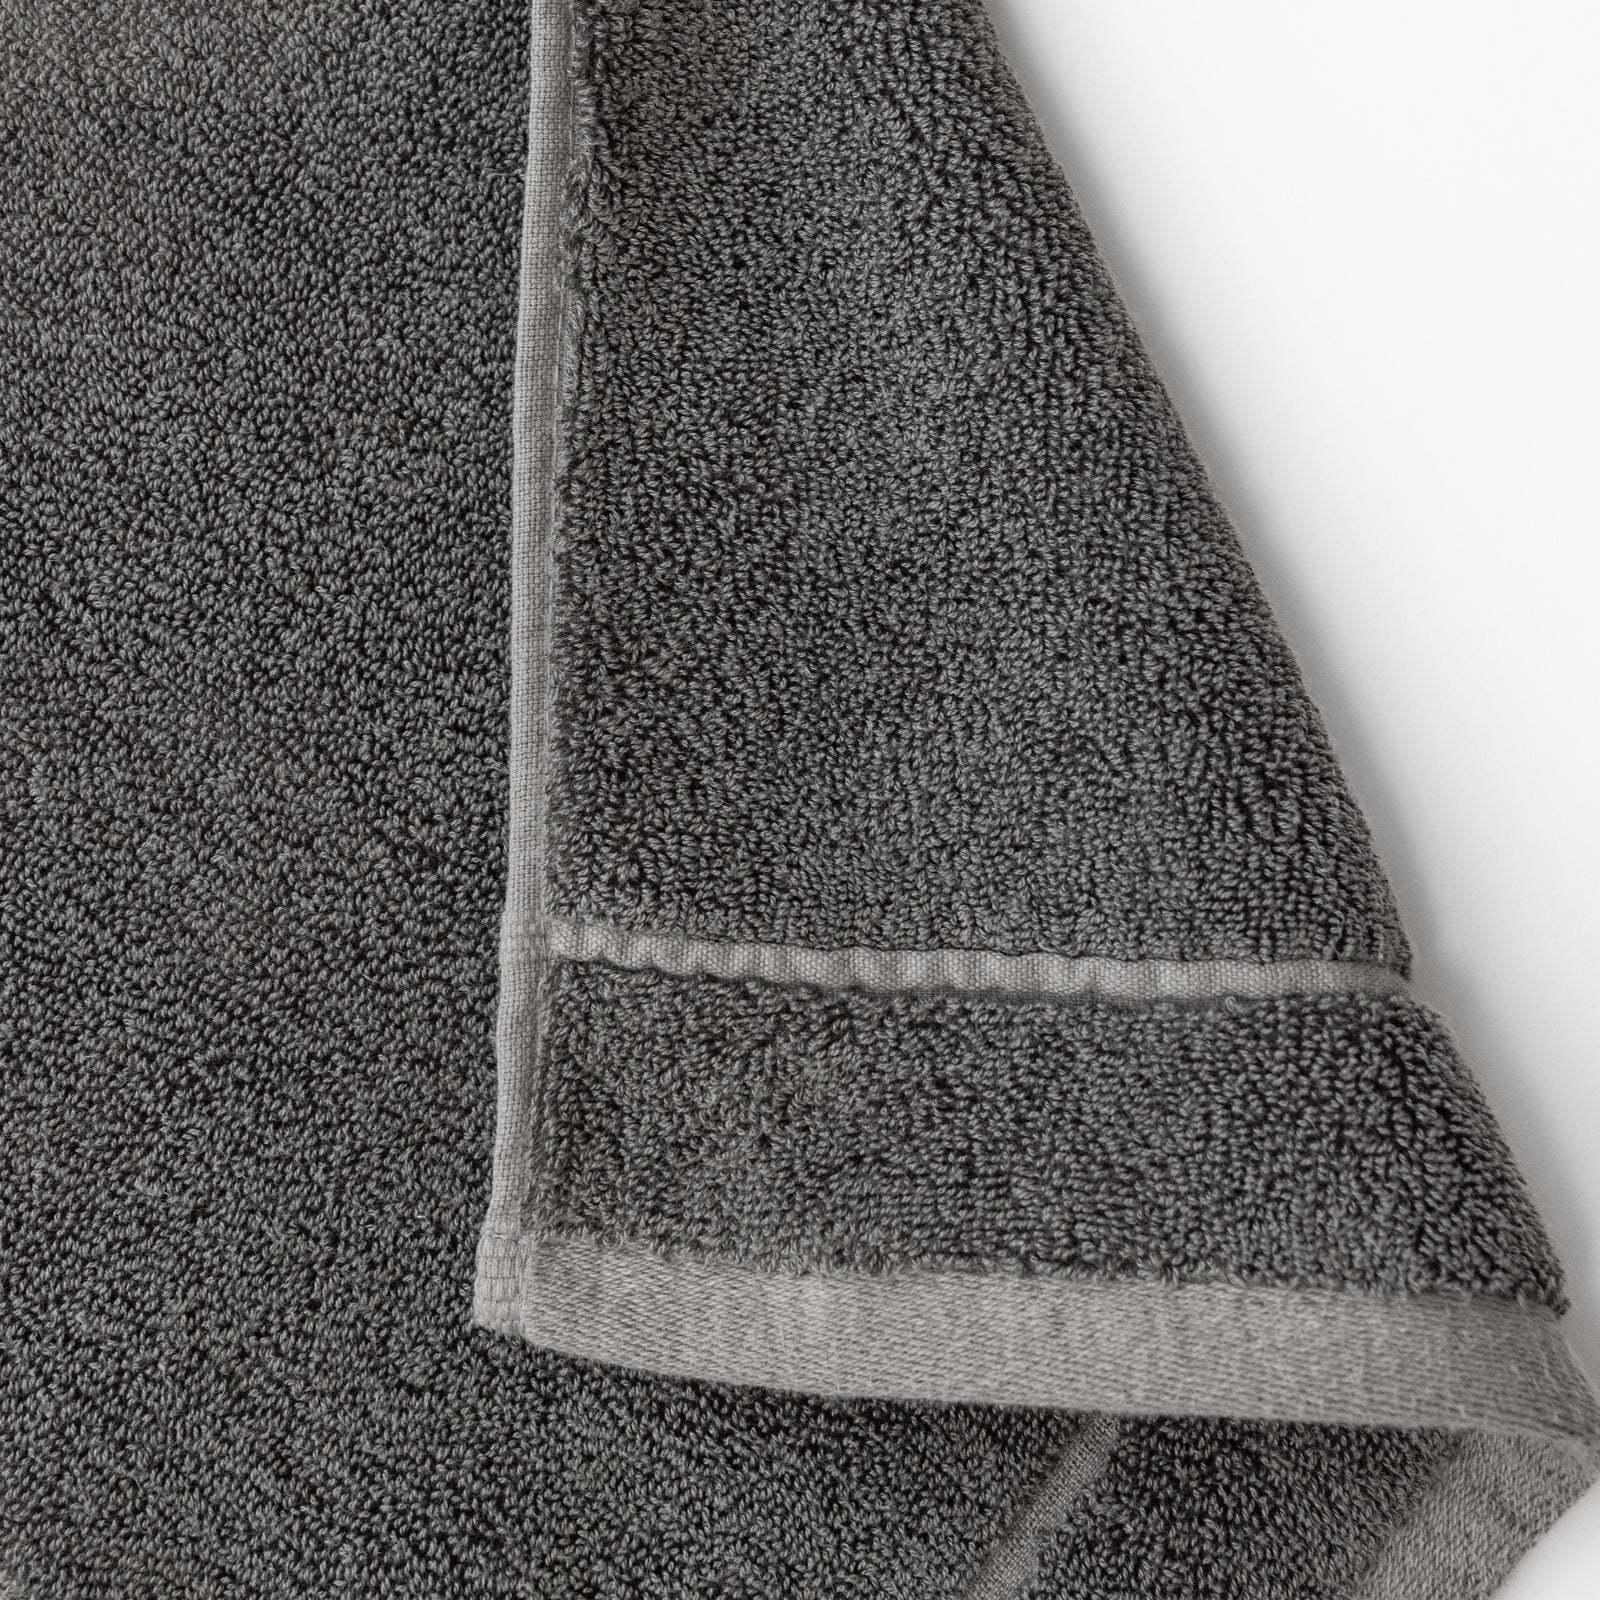 Charcoal Premium Plush Bath Towel. Photo of Premium Plush Bath Towels taken on a white background showing only the corner of the towel. 